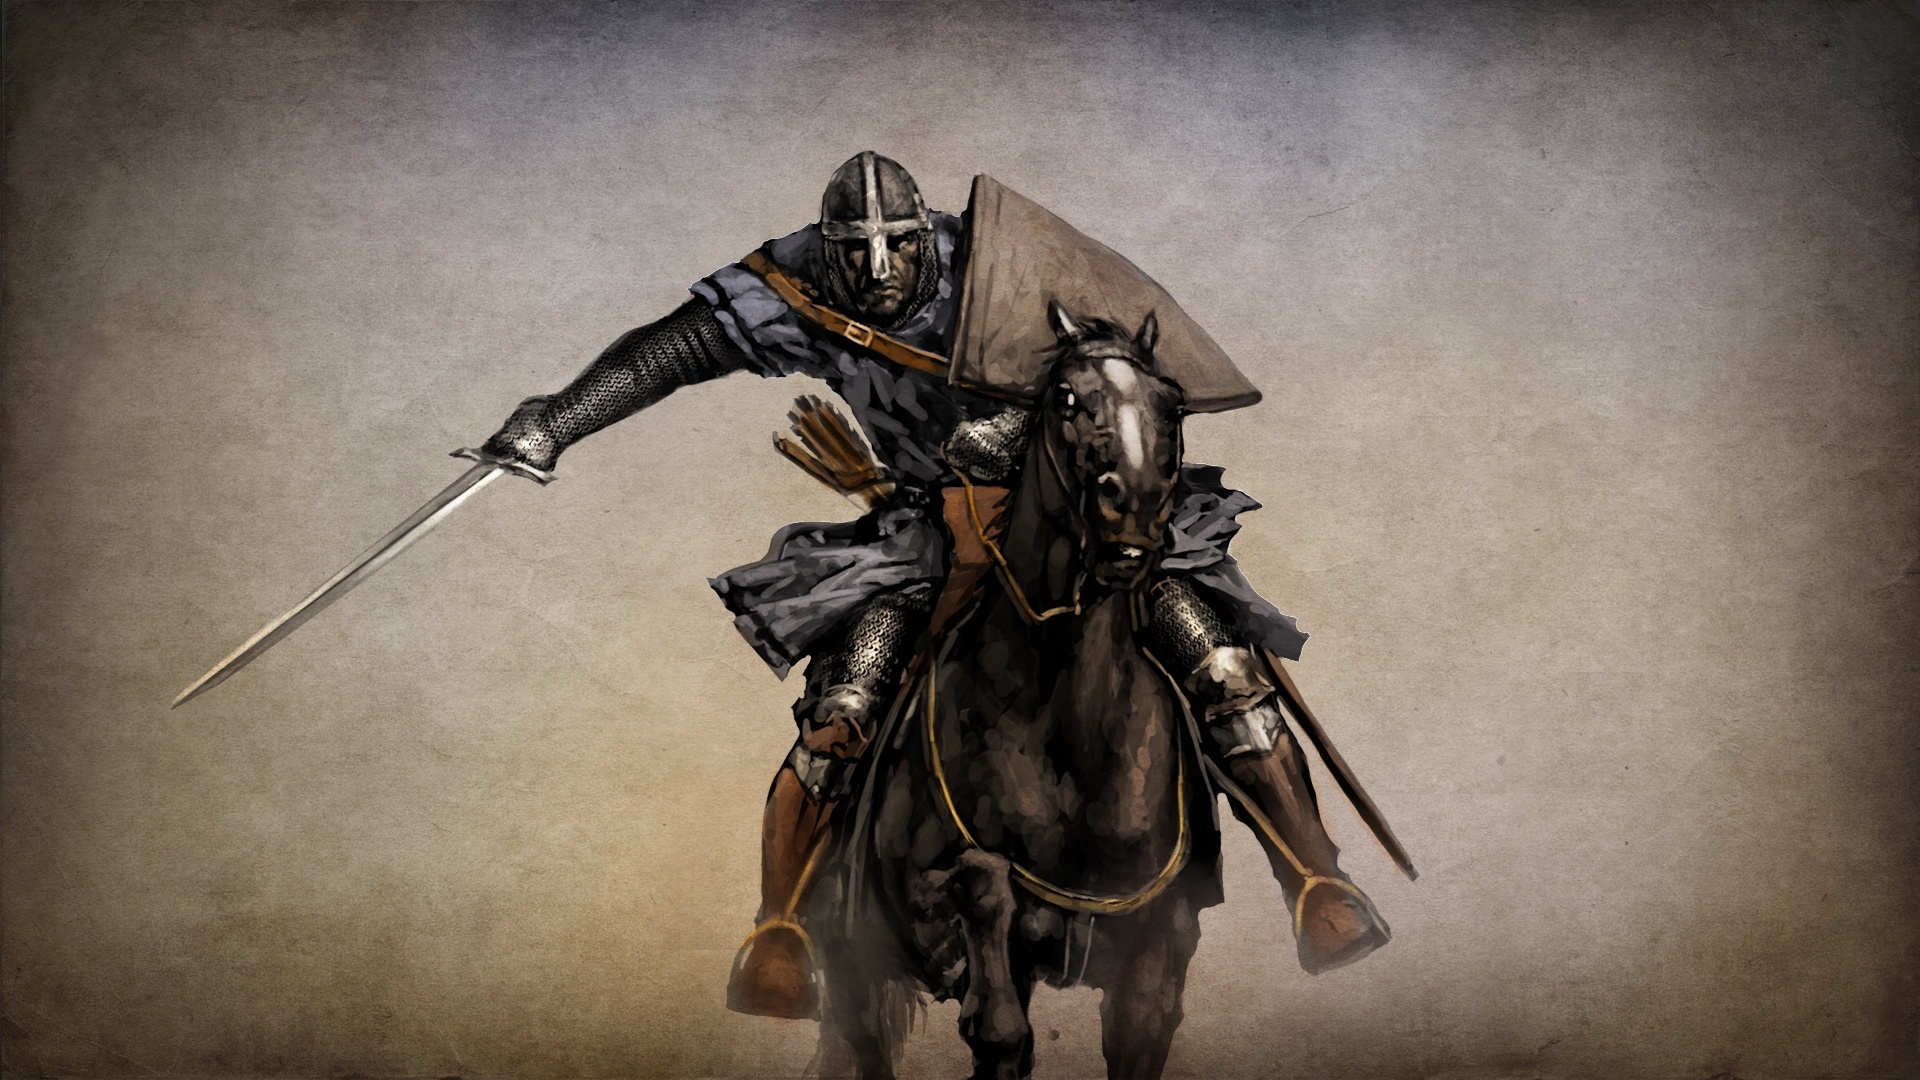 Mount and blade knight horse sword armor wallpaper | 1920x1080